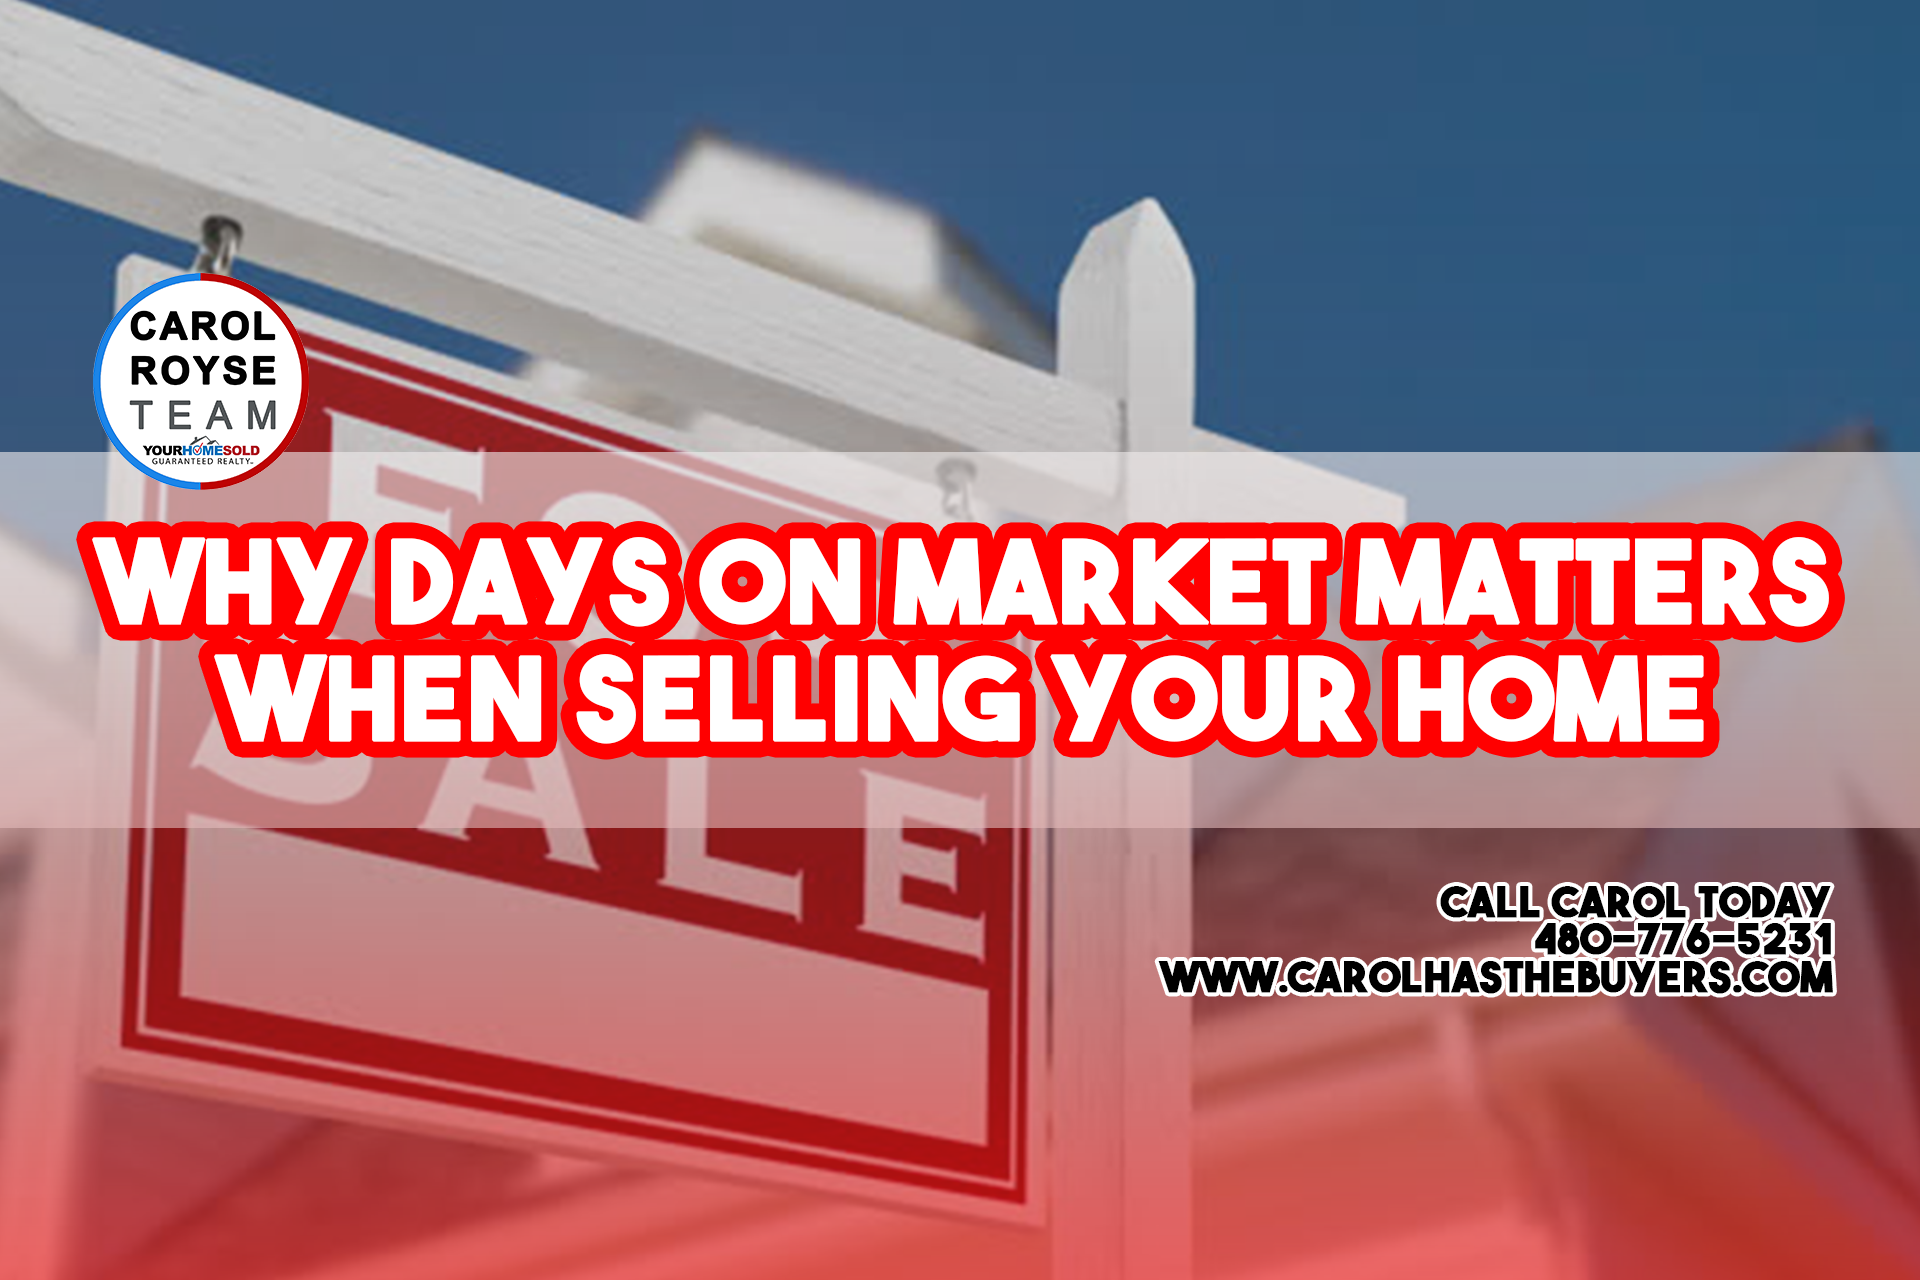 Why Days on Market Matters When Selling Your Home